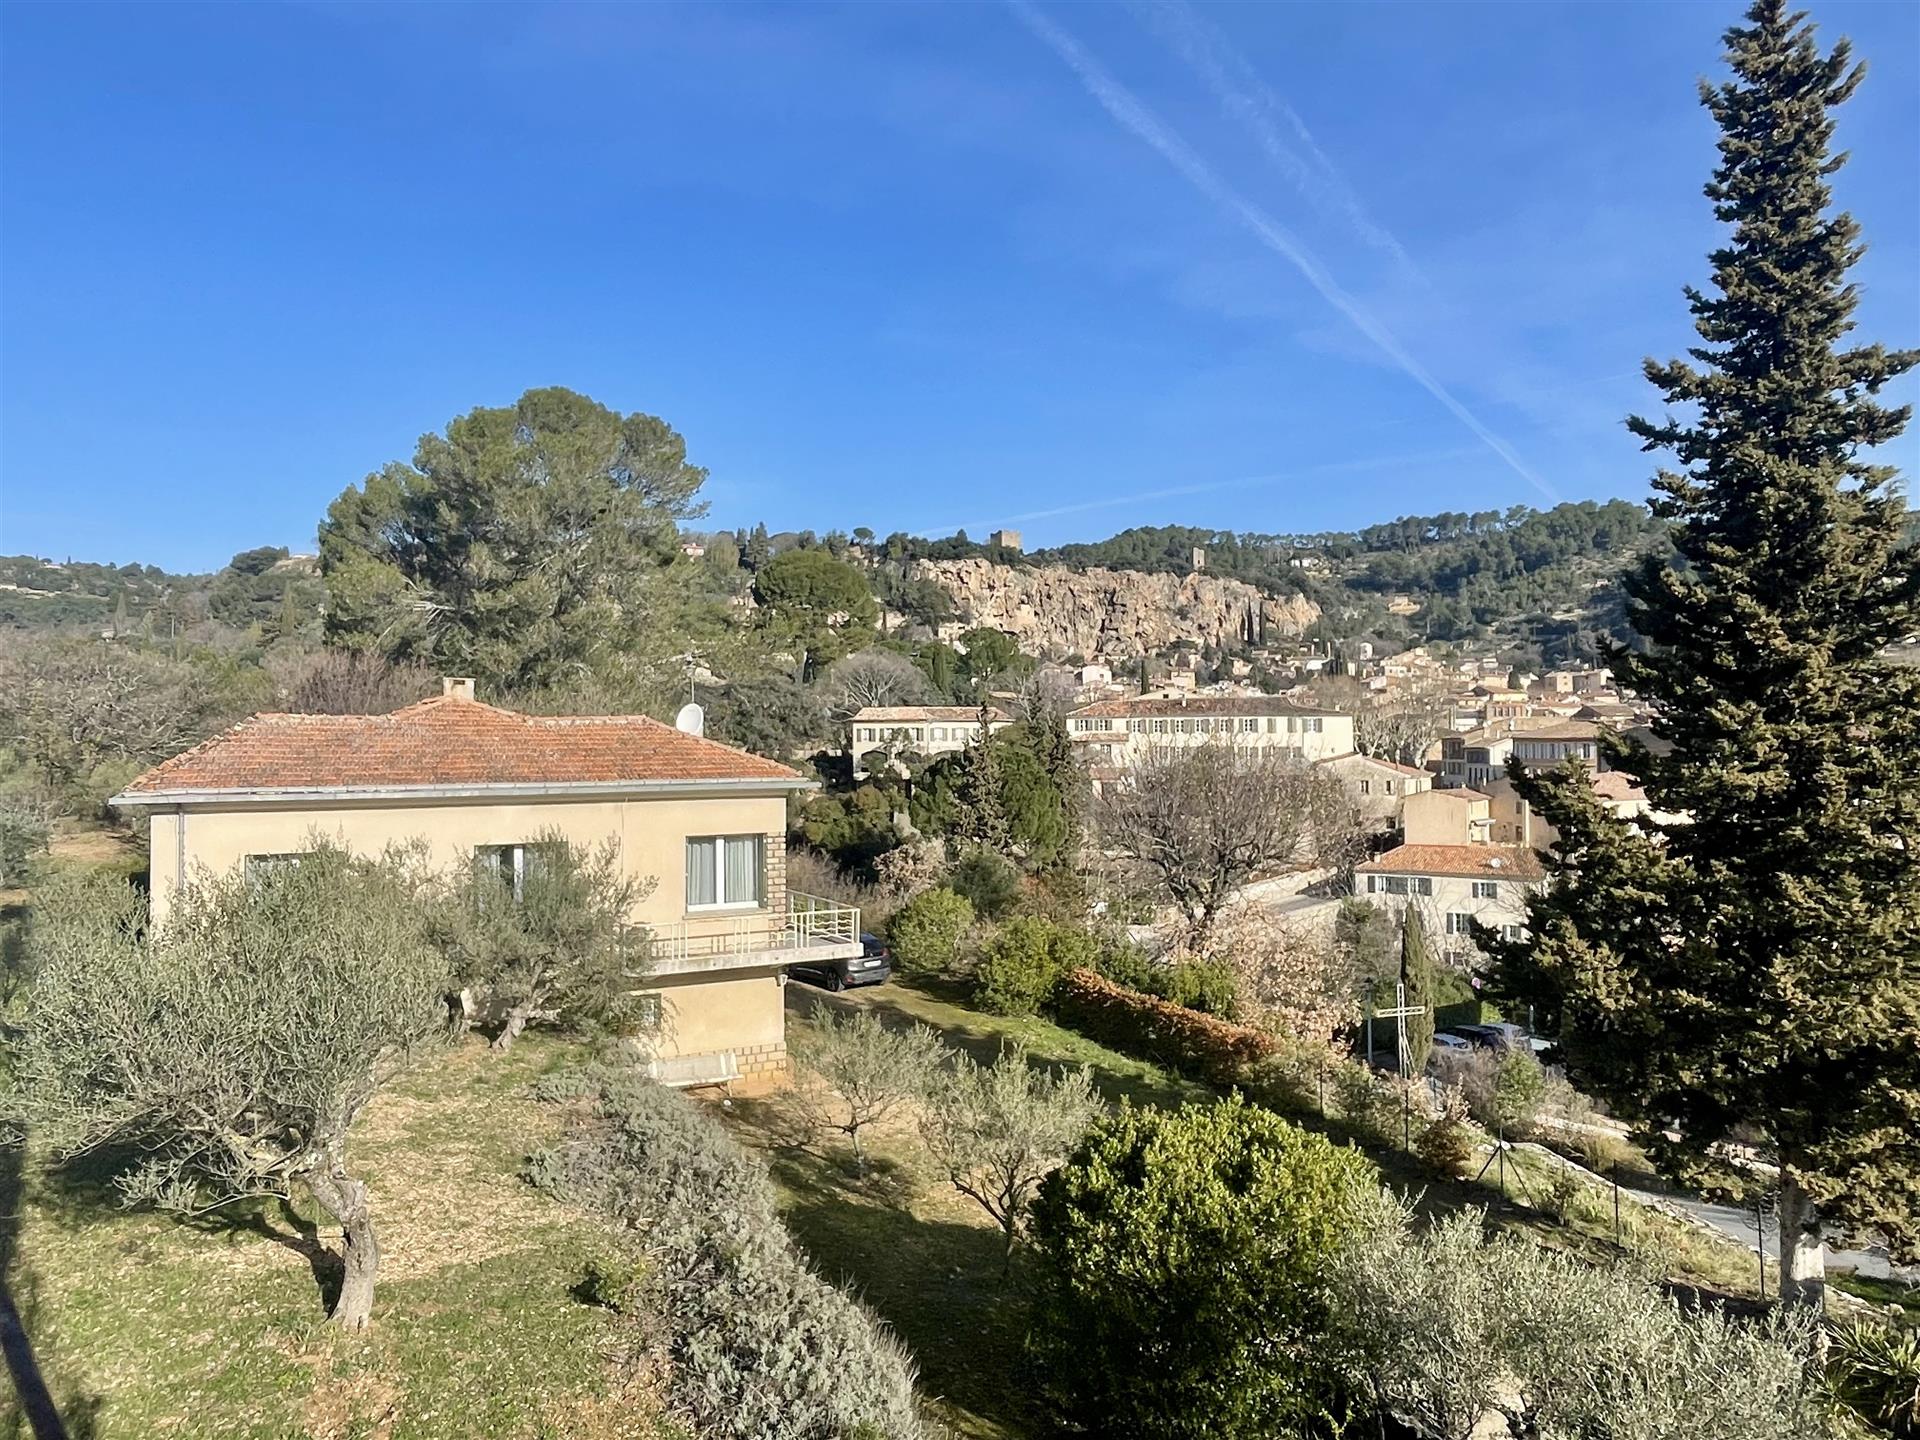 Villa with a beautiful view, 2 steps from the village of Cotignac